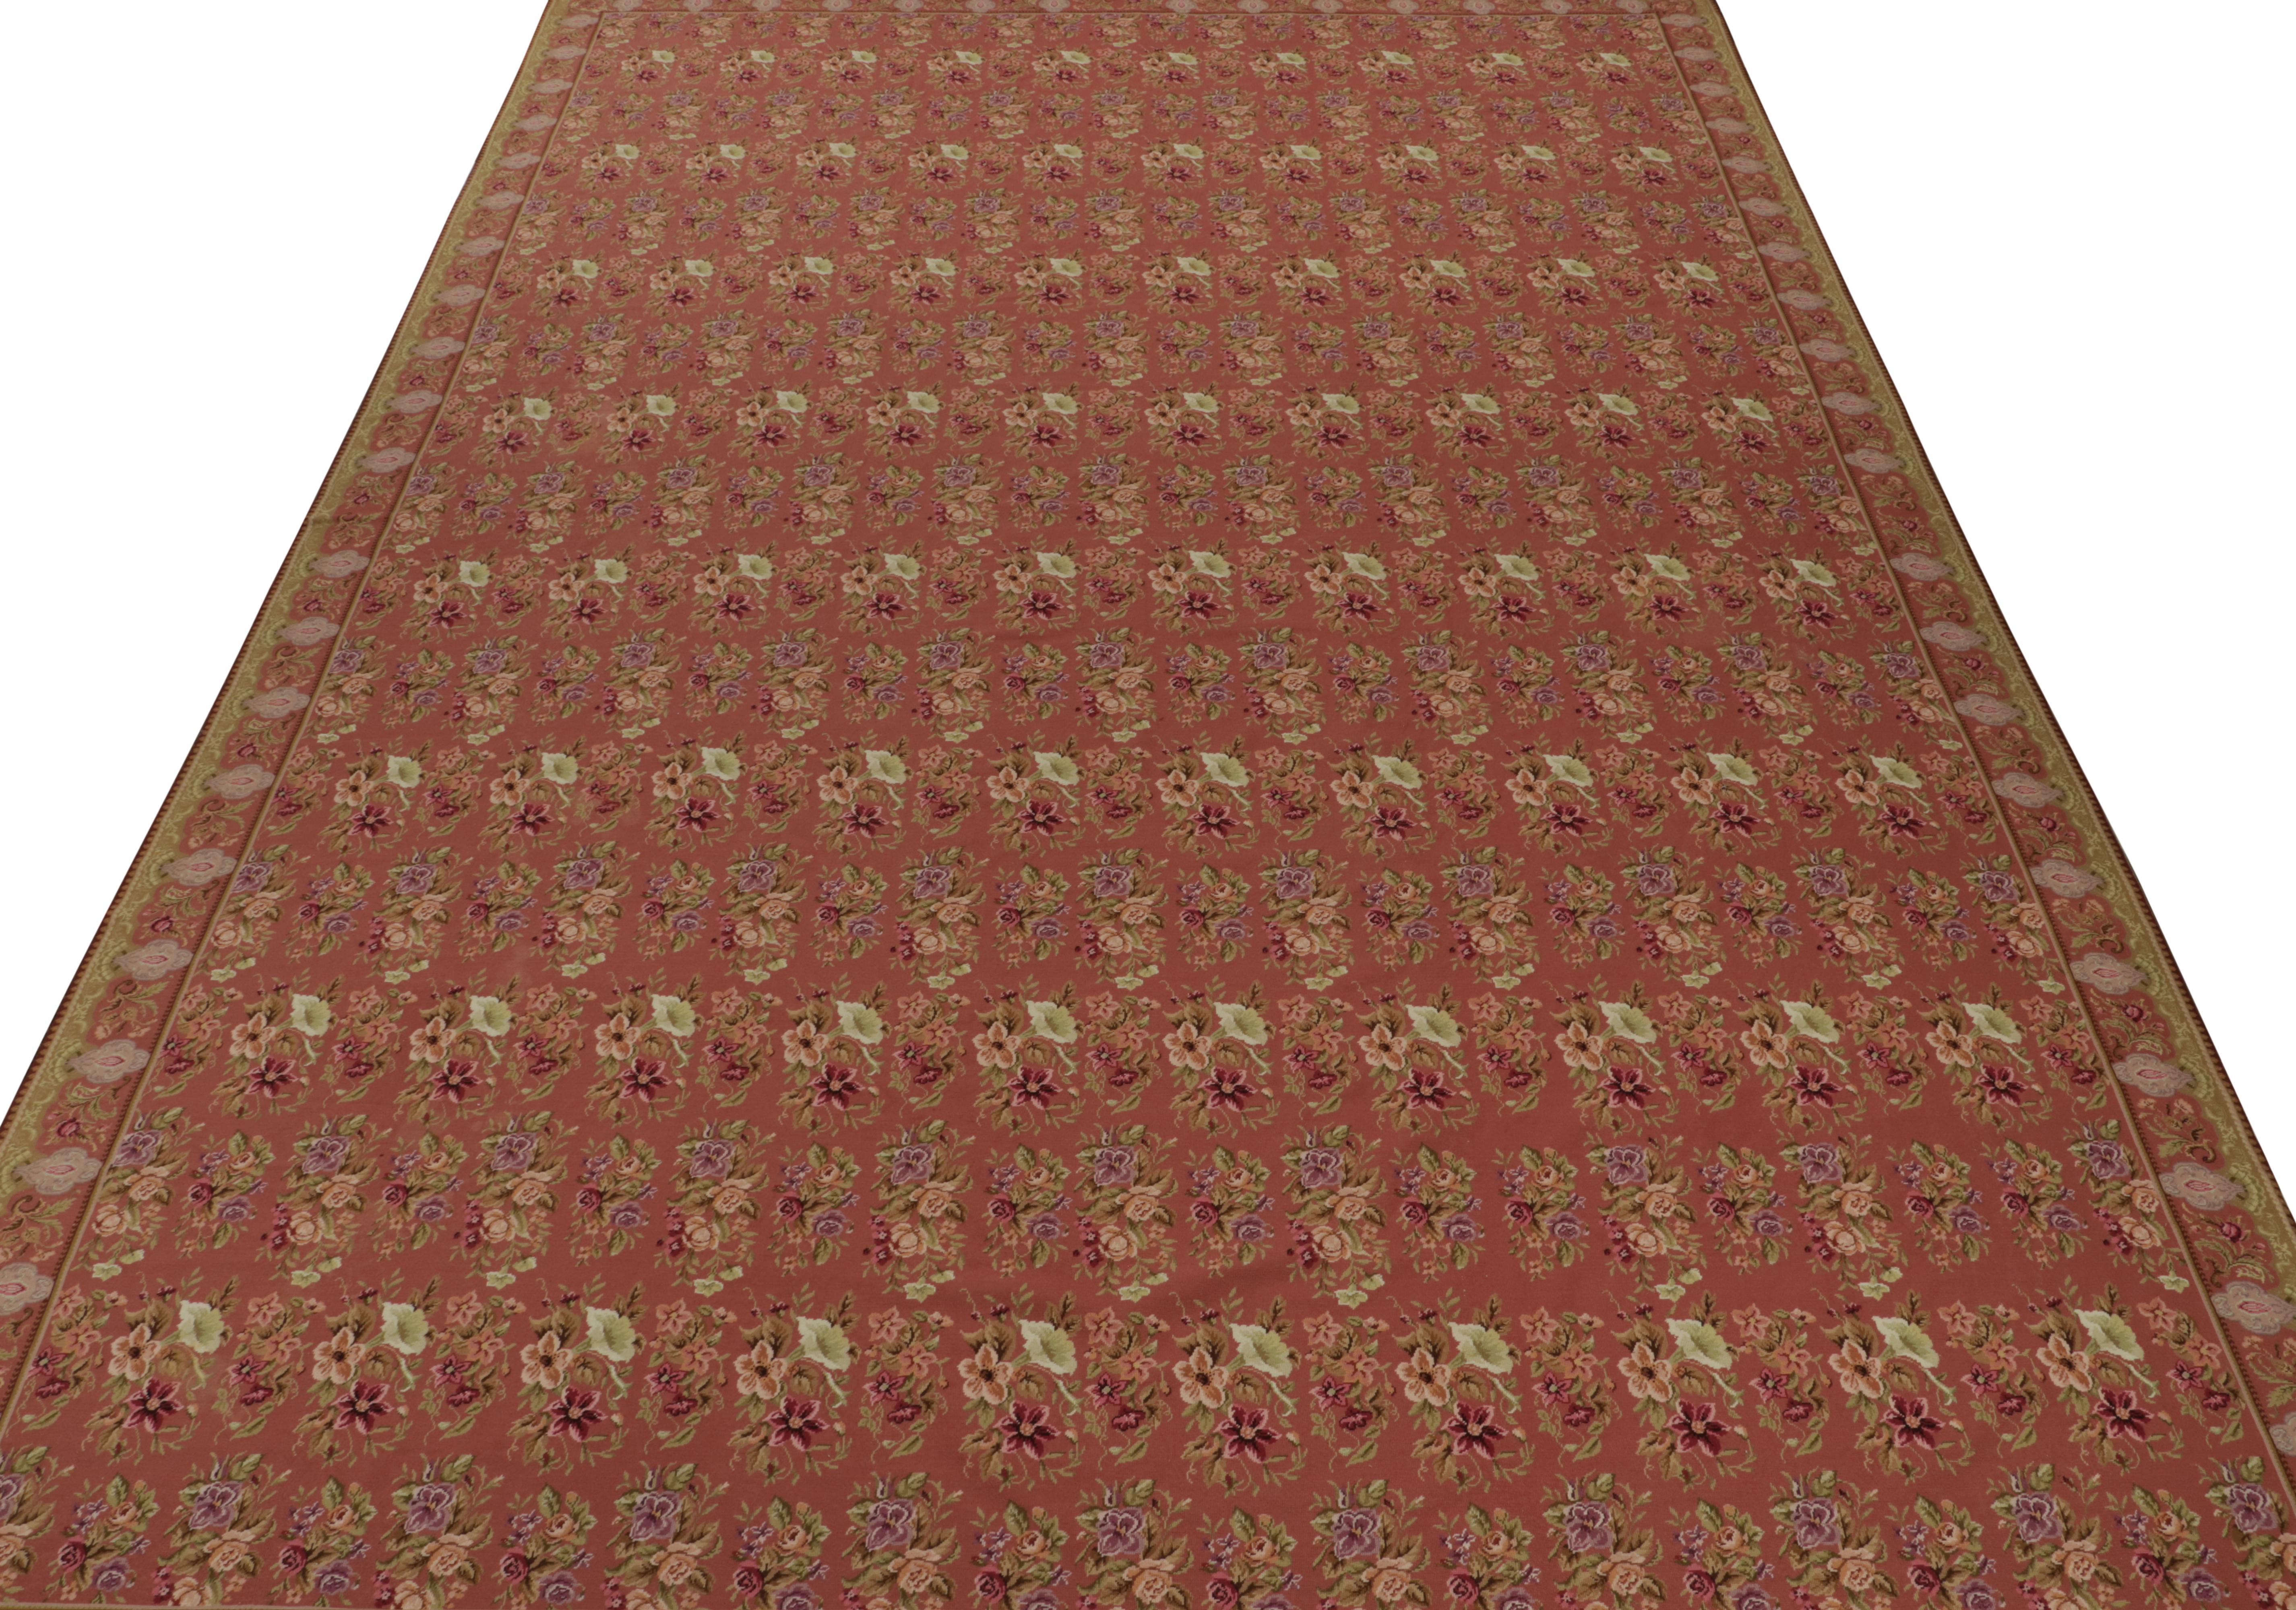 Chinese Vintage Needlepoint Rug in Red with Floral Patterns - by Rug & Kilim For Sale